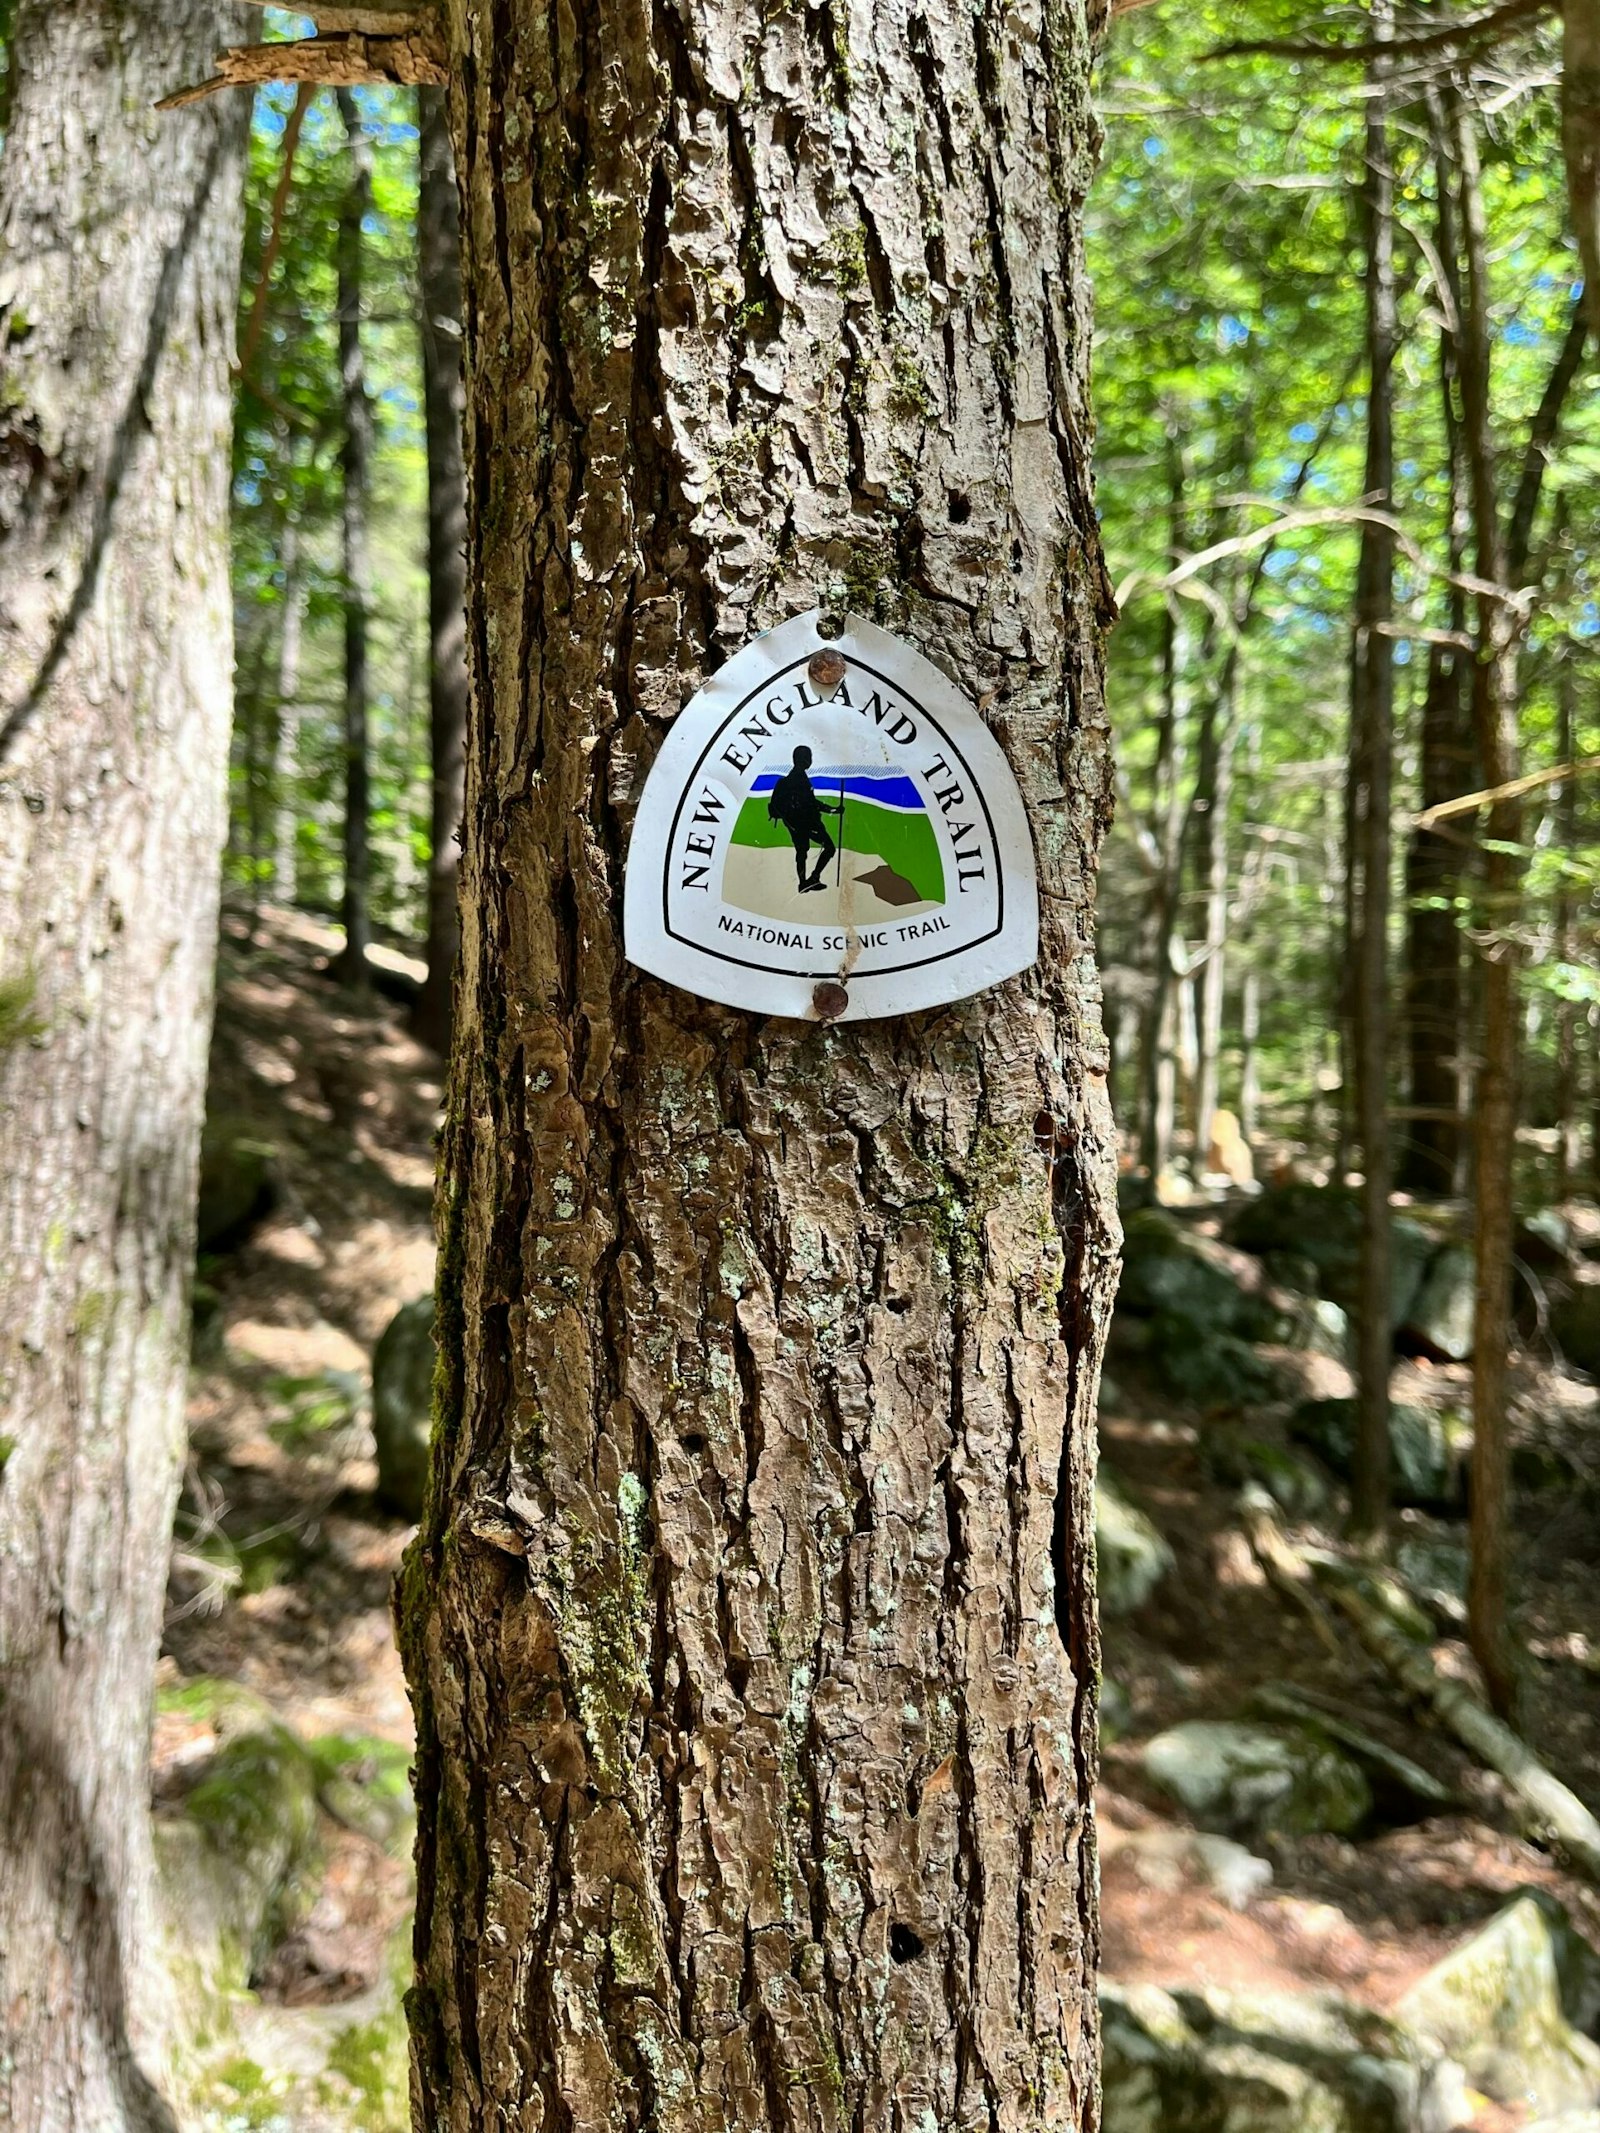 New England National Scenic Trail logo on a tree stump